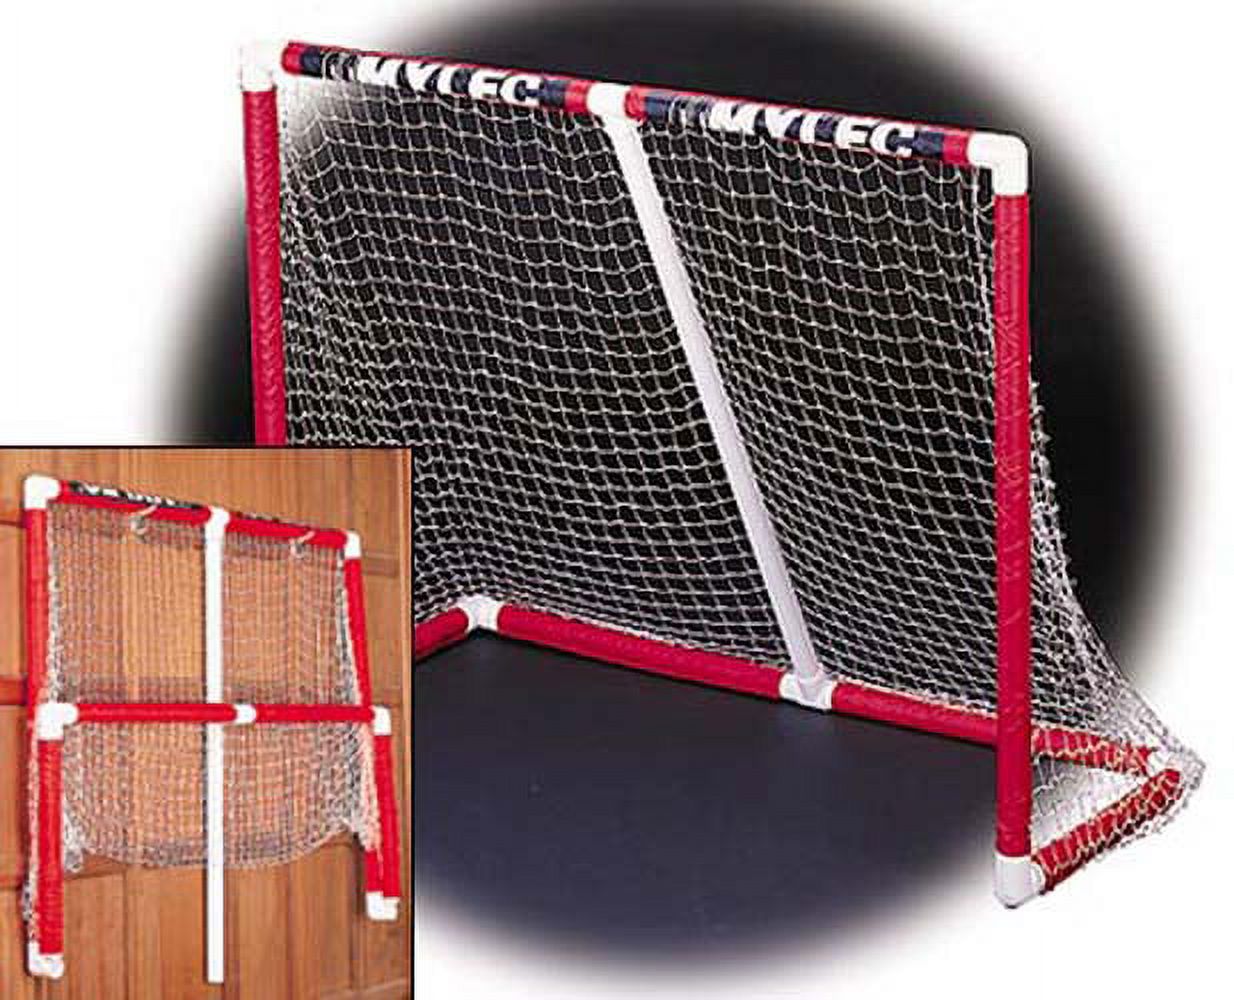 Mylec Easy Assemble Junior PVC Hockey Goal for Indoor + Outdoor - 54"W x 44"H x 24"D - 15 Pounds - Light + Portable - image 2 of 3